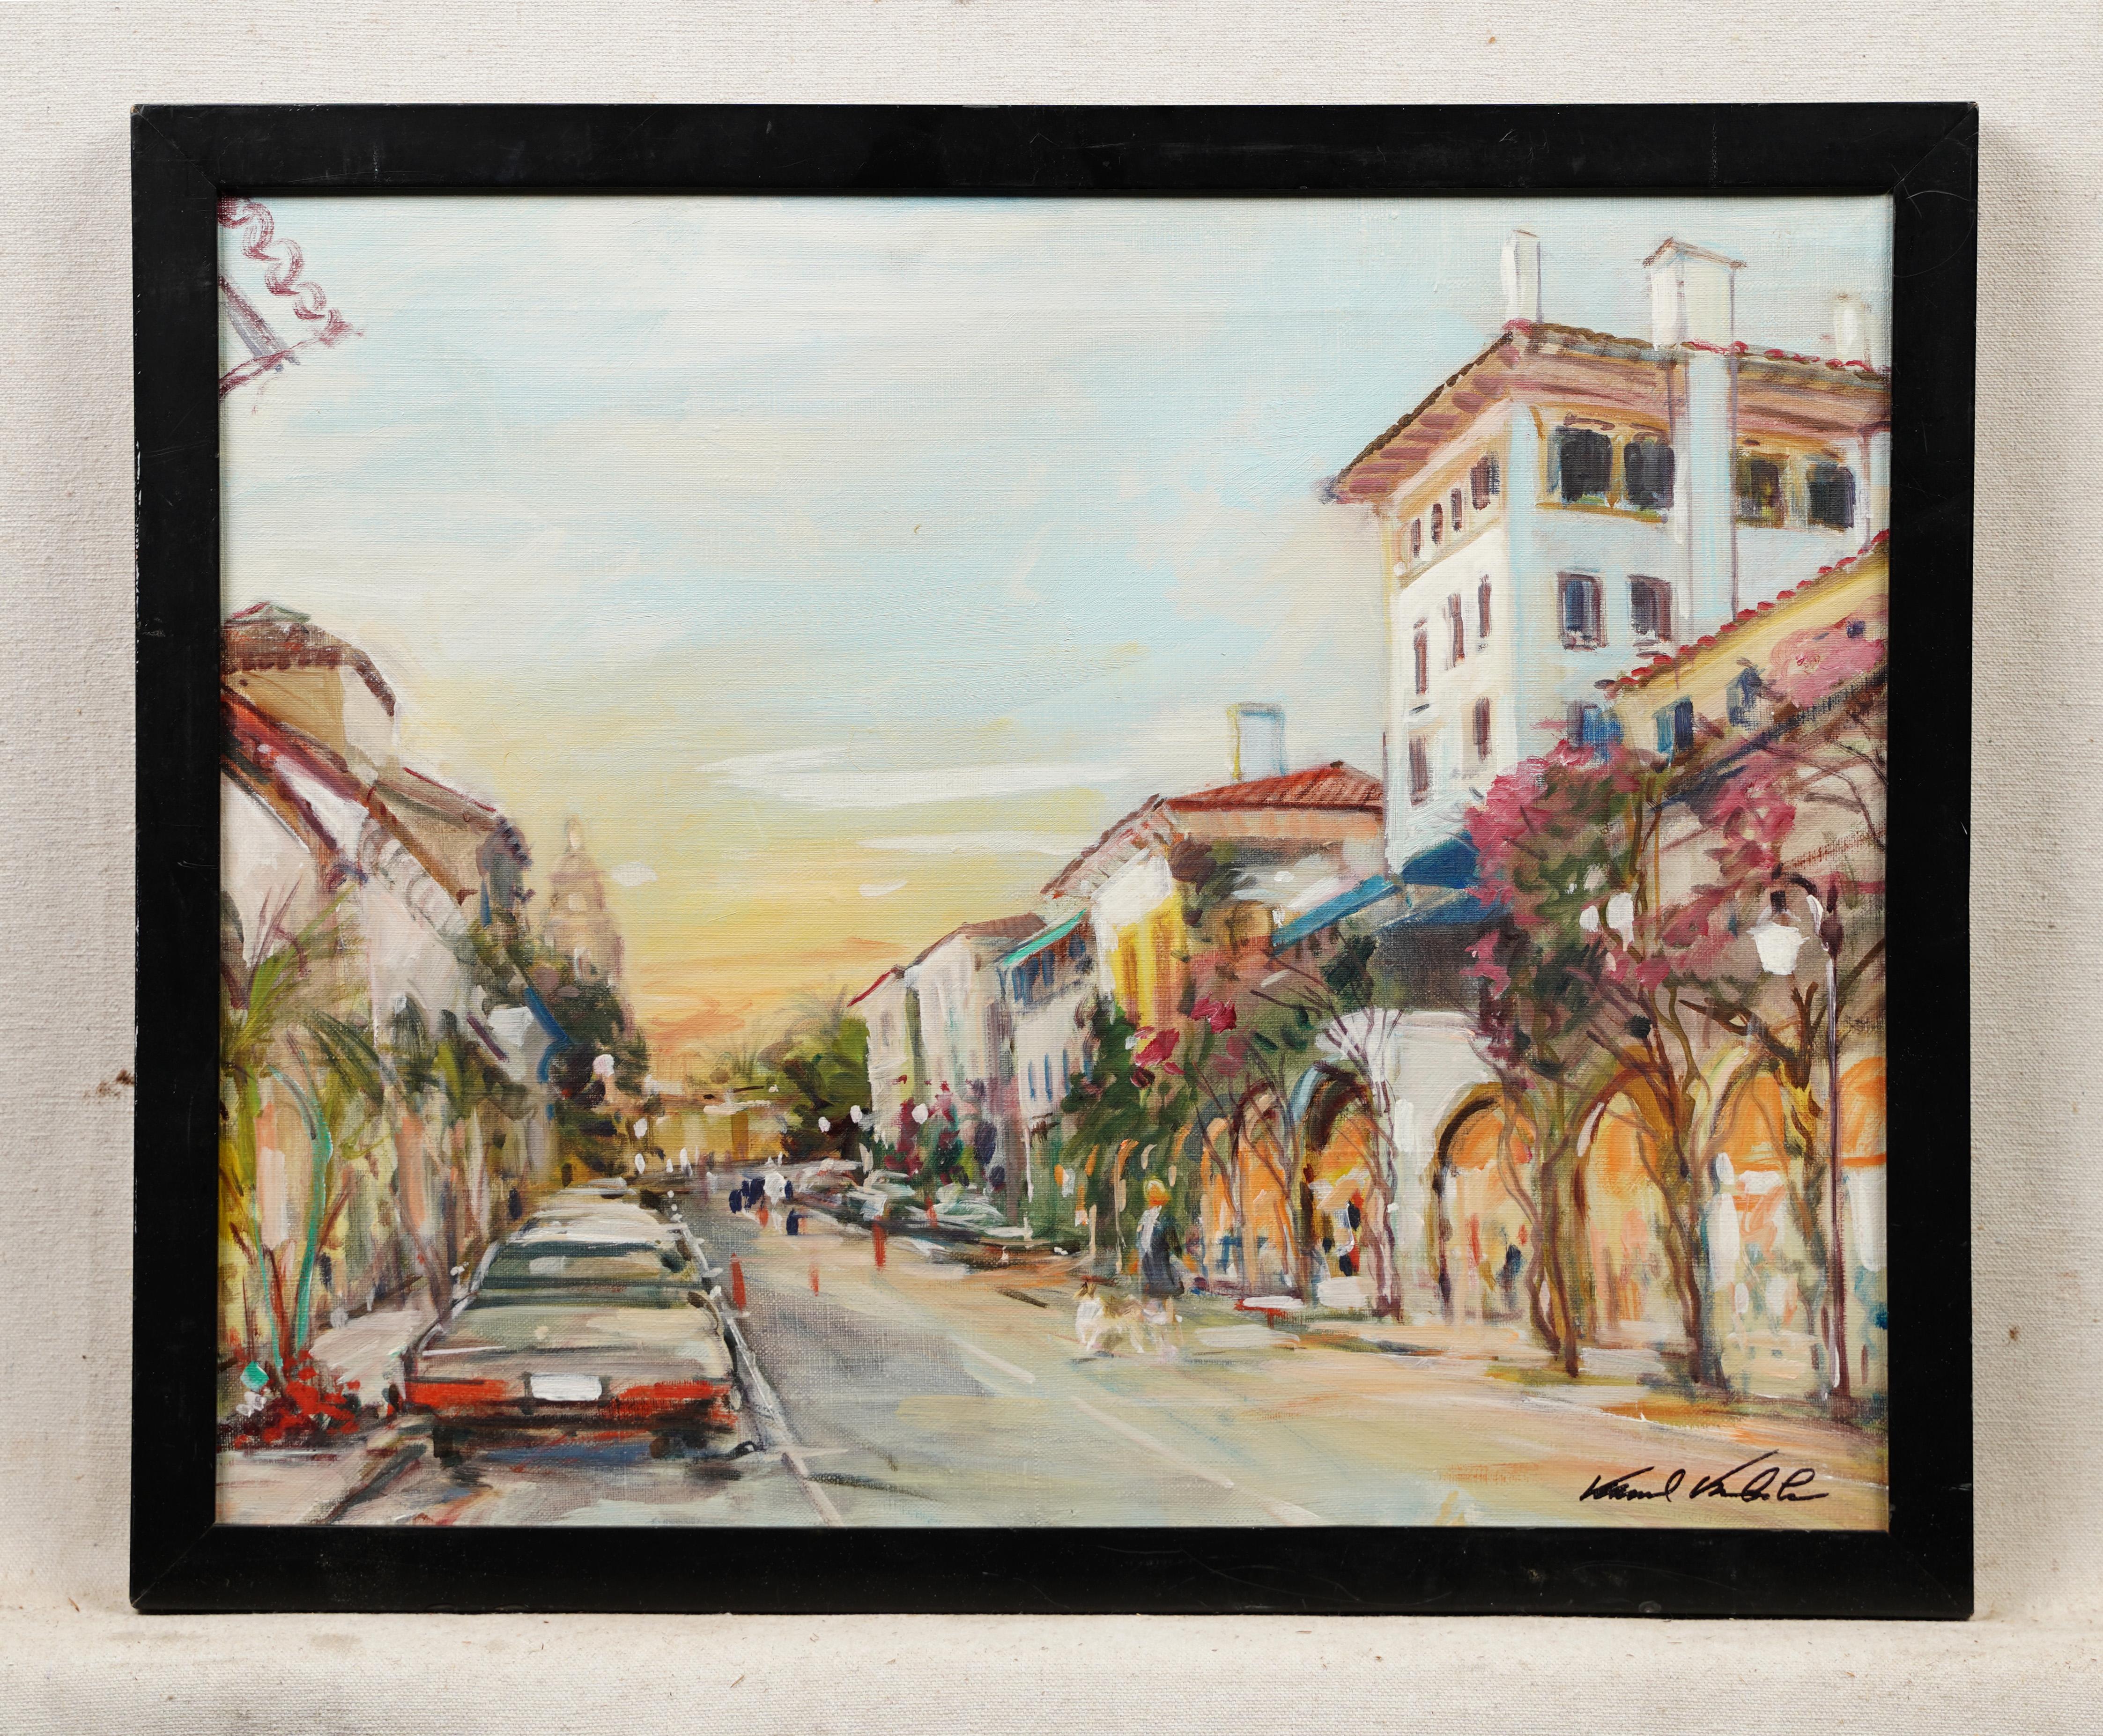 Antique American impressionist street scene oil painting by Kamil Kubik (1930 - 2011) .  Oil on canvas.  Framed.  Signed.